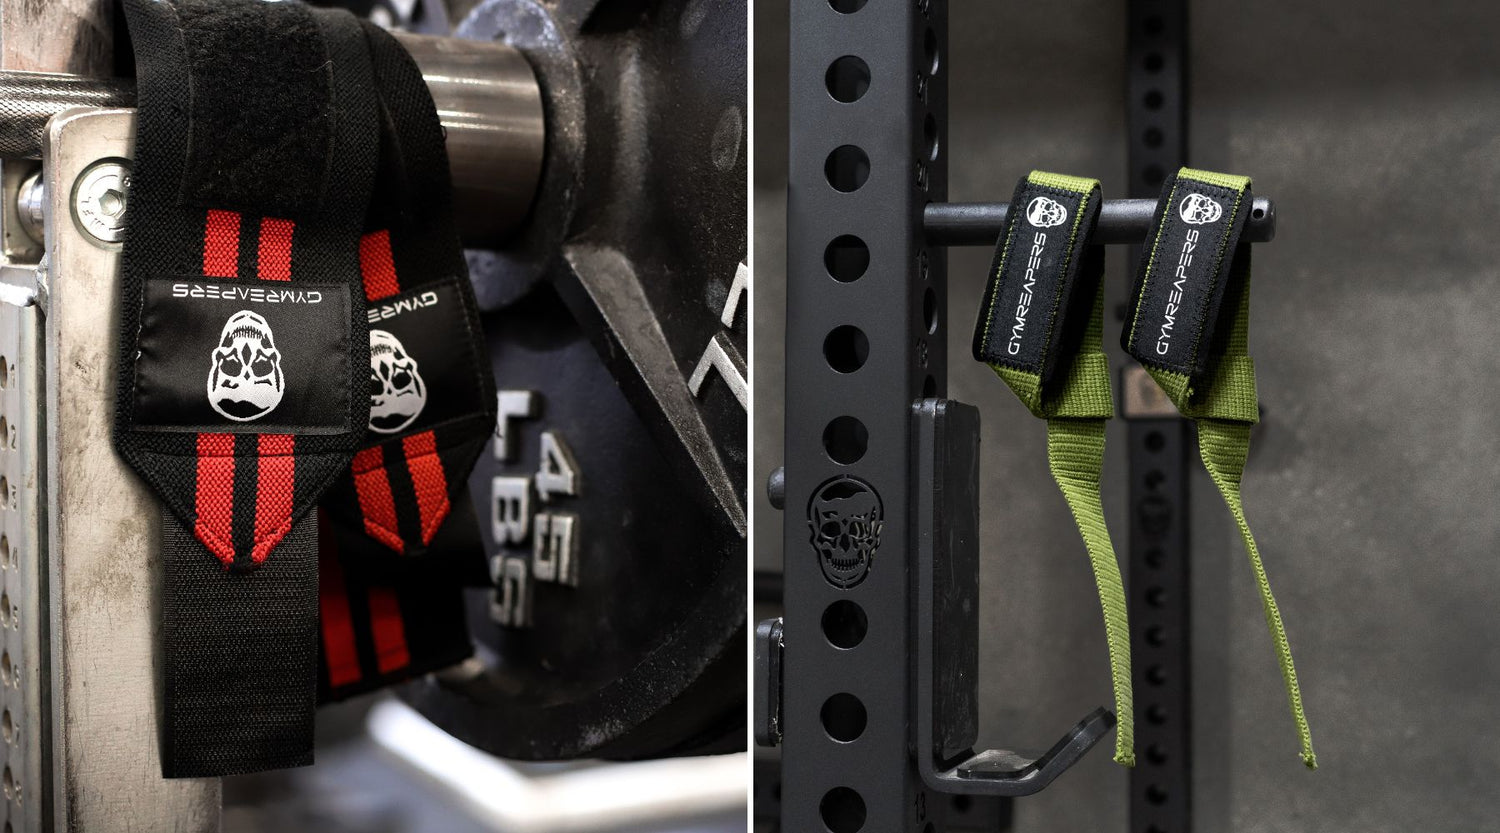 Wrist Wraps vs Lifting Straps: What Are The Differences?